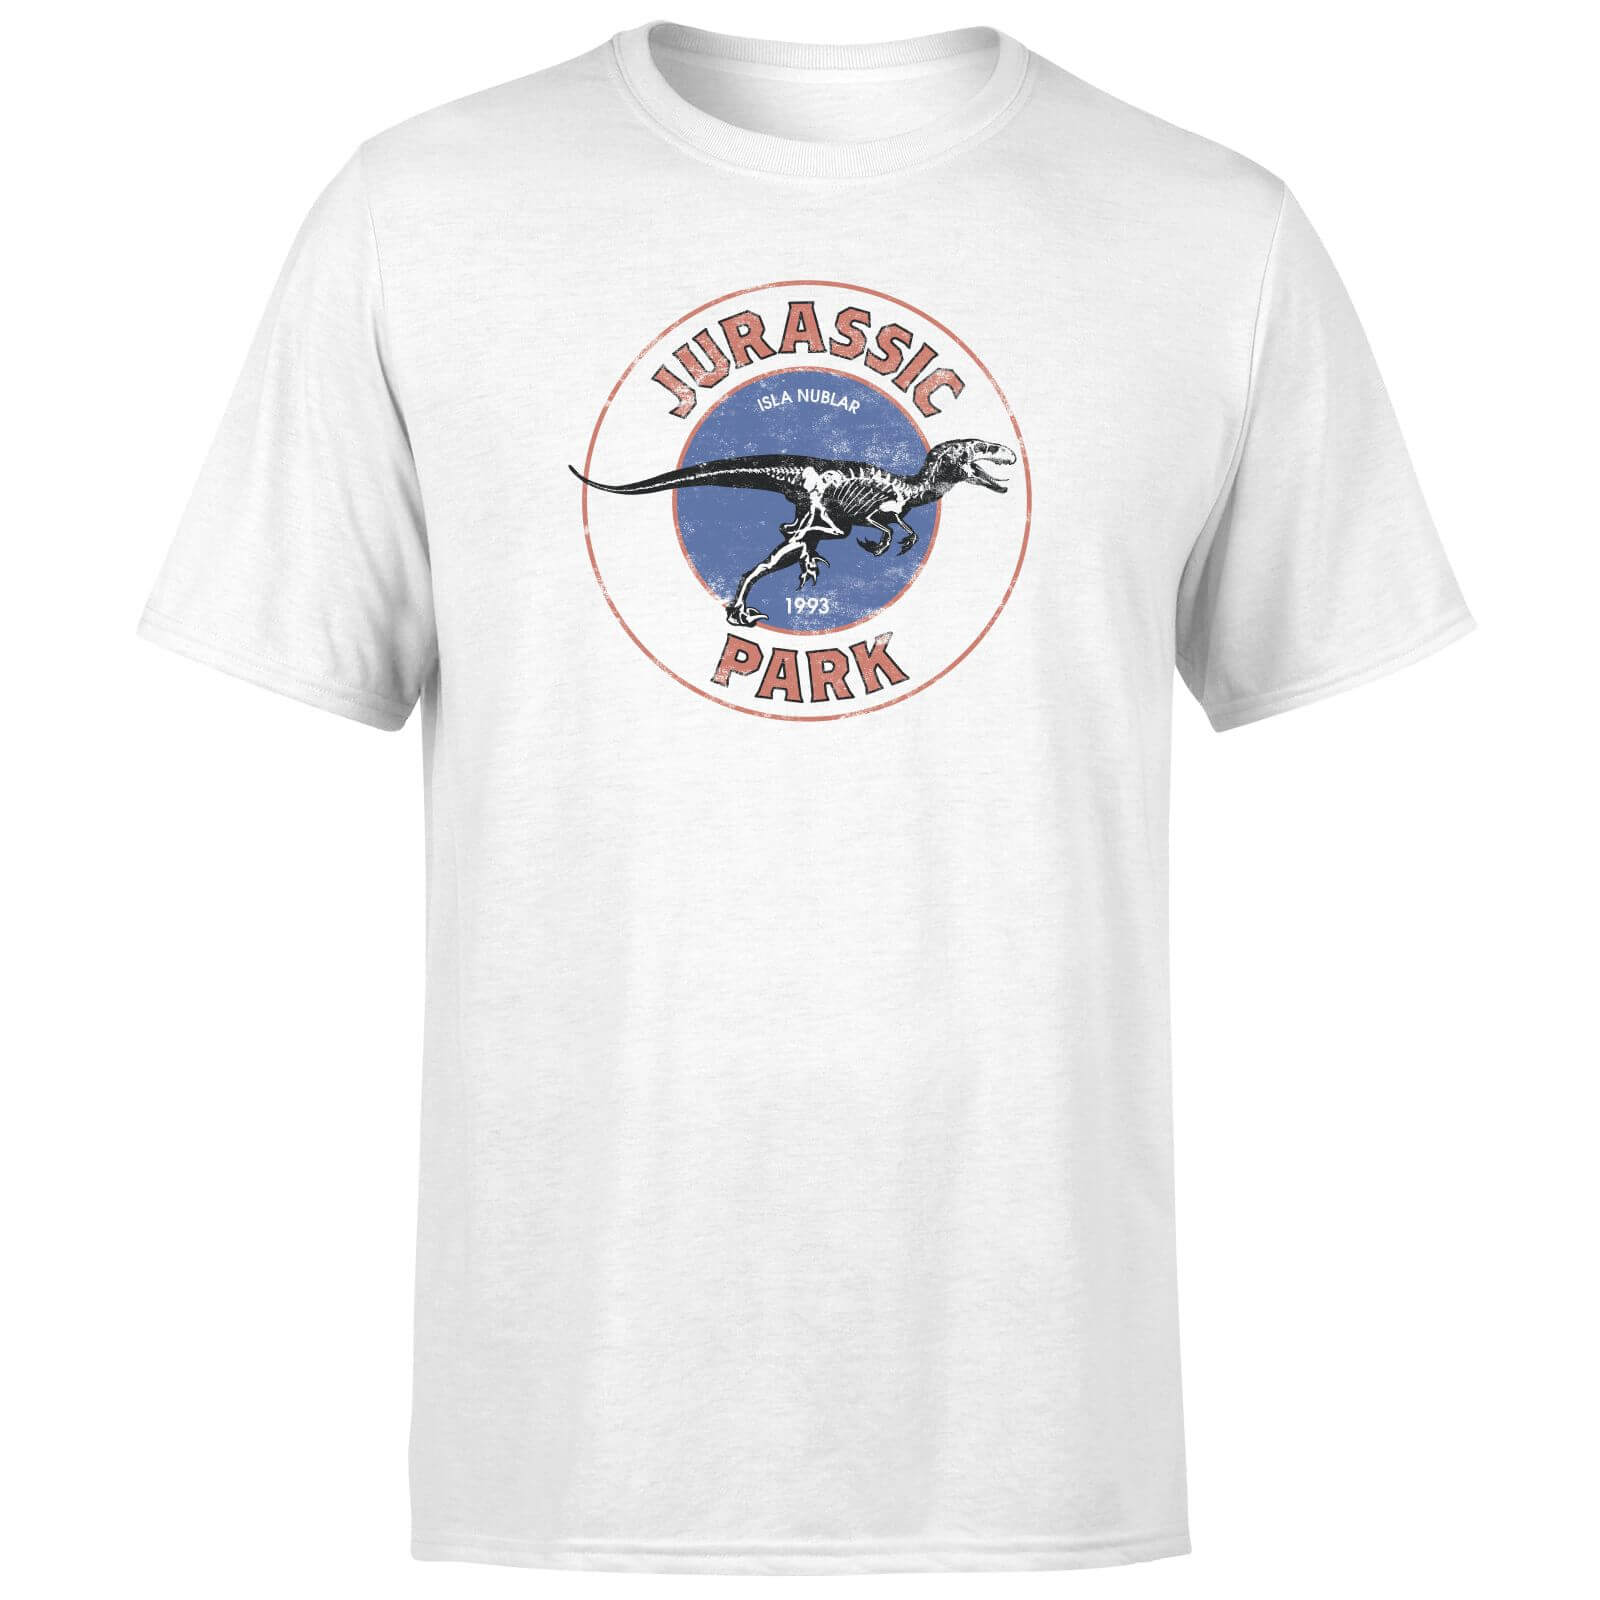 View the best prices for: jurassic park jurassic target mens t-shirt